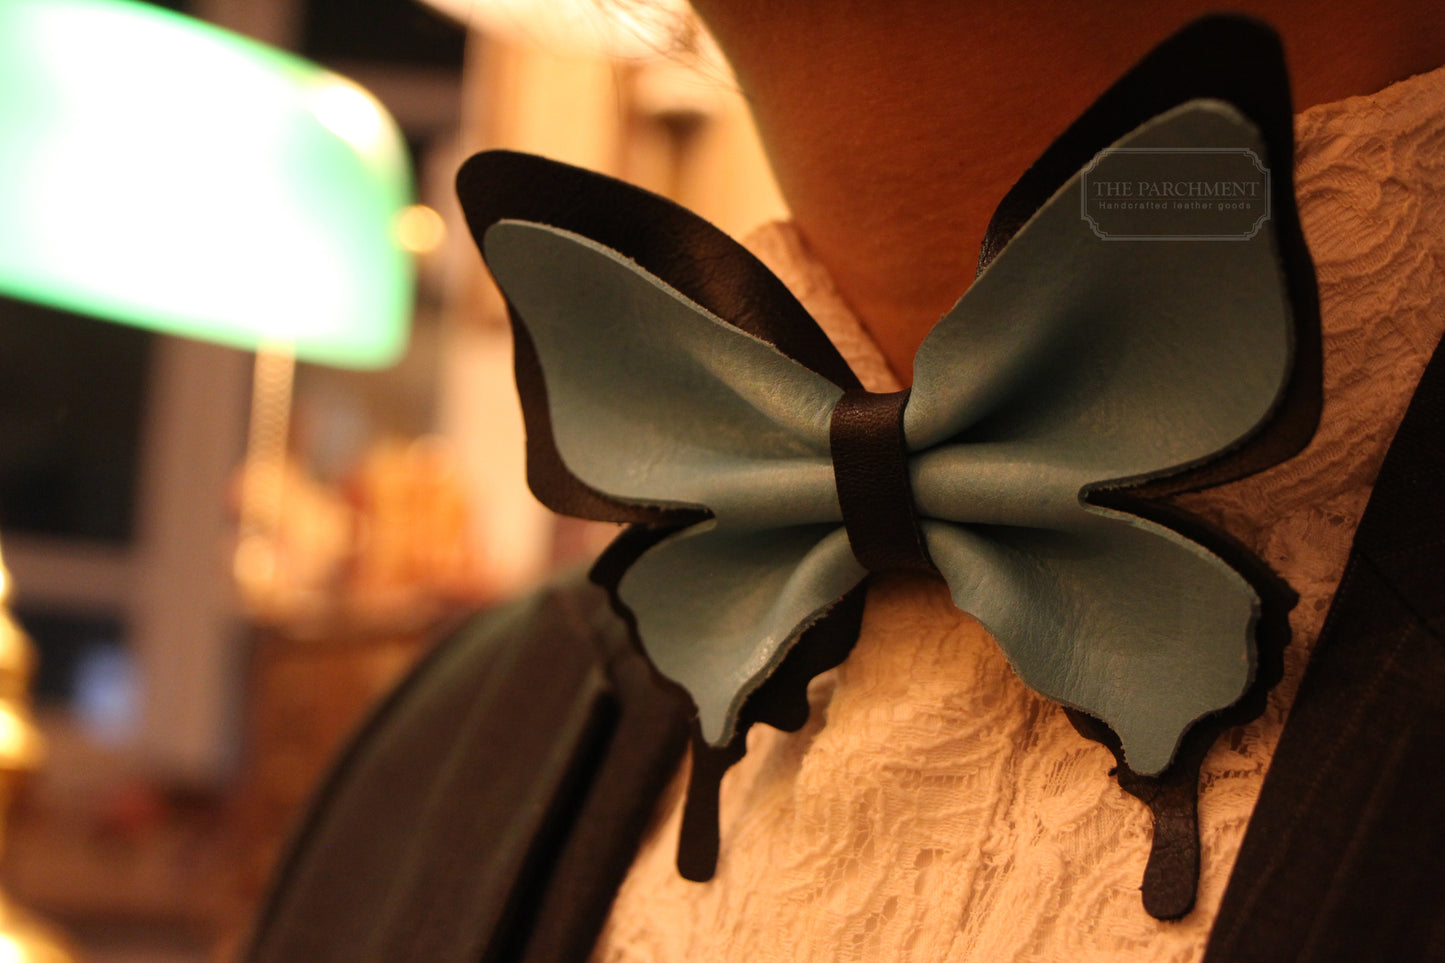 Customized Color Handmade Leather Monarch Butterfly Bow | Made-to-Order 6 weeks lead time